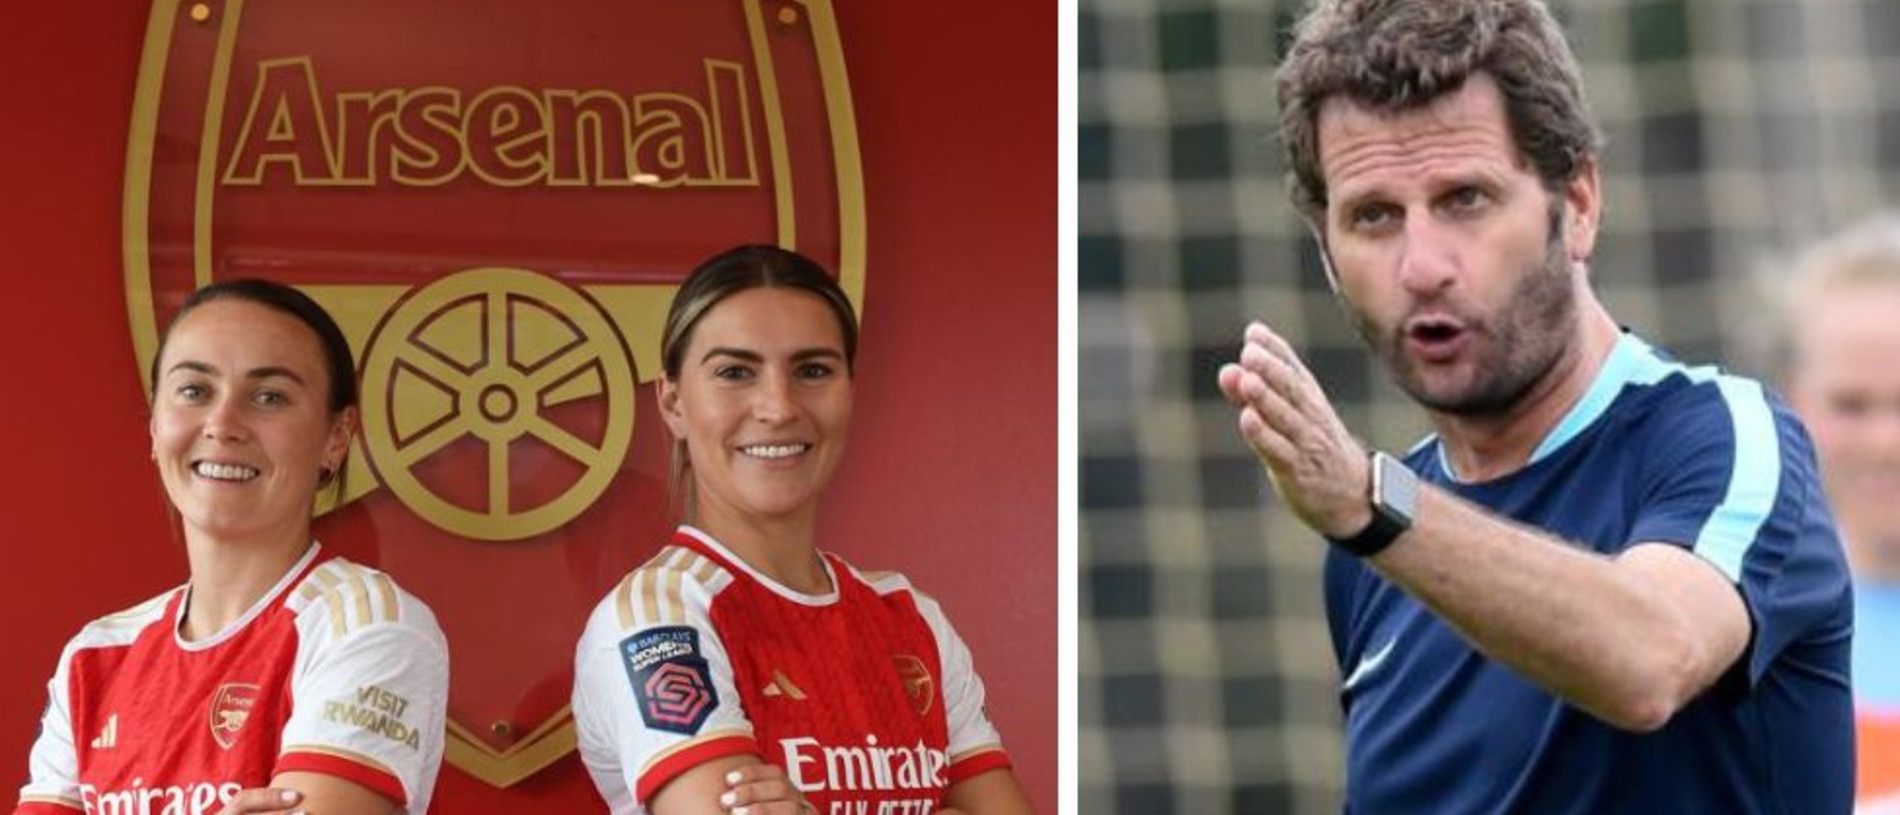 Former Arsenal women’s coach Joe Montemurro will attempt to plot the downfall of his old club next month.